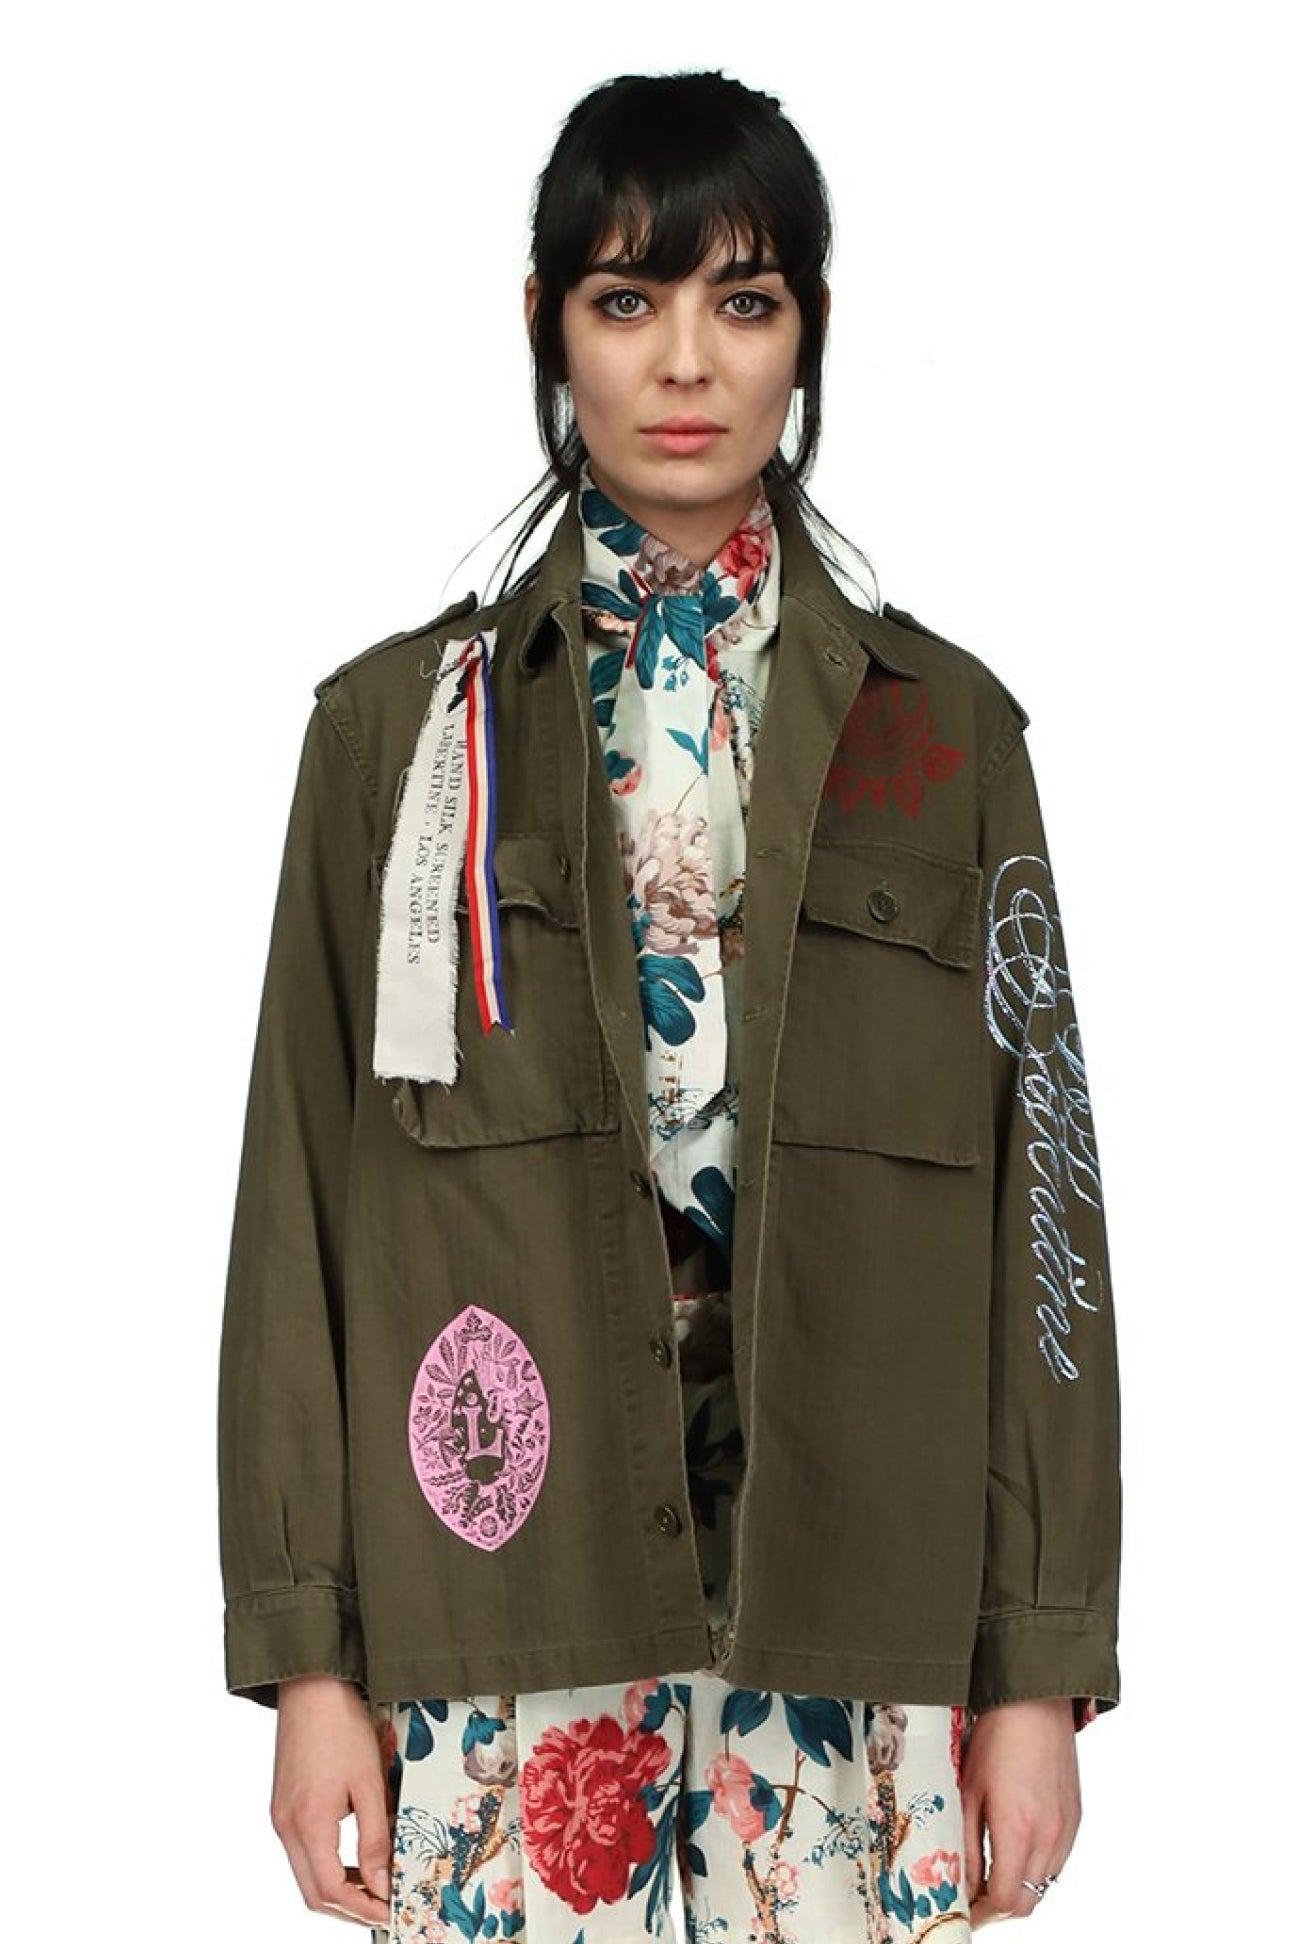 Saint Laurent Embroidered Detail Military Jacket In Green